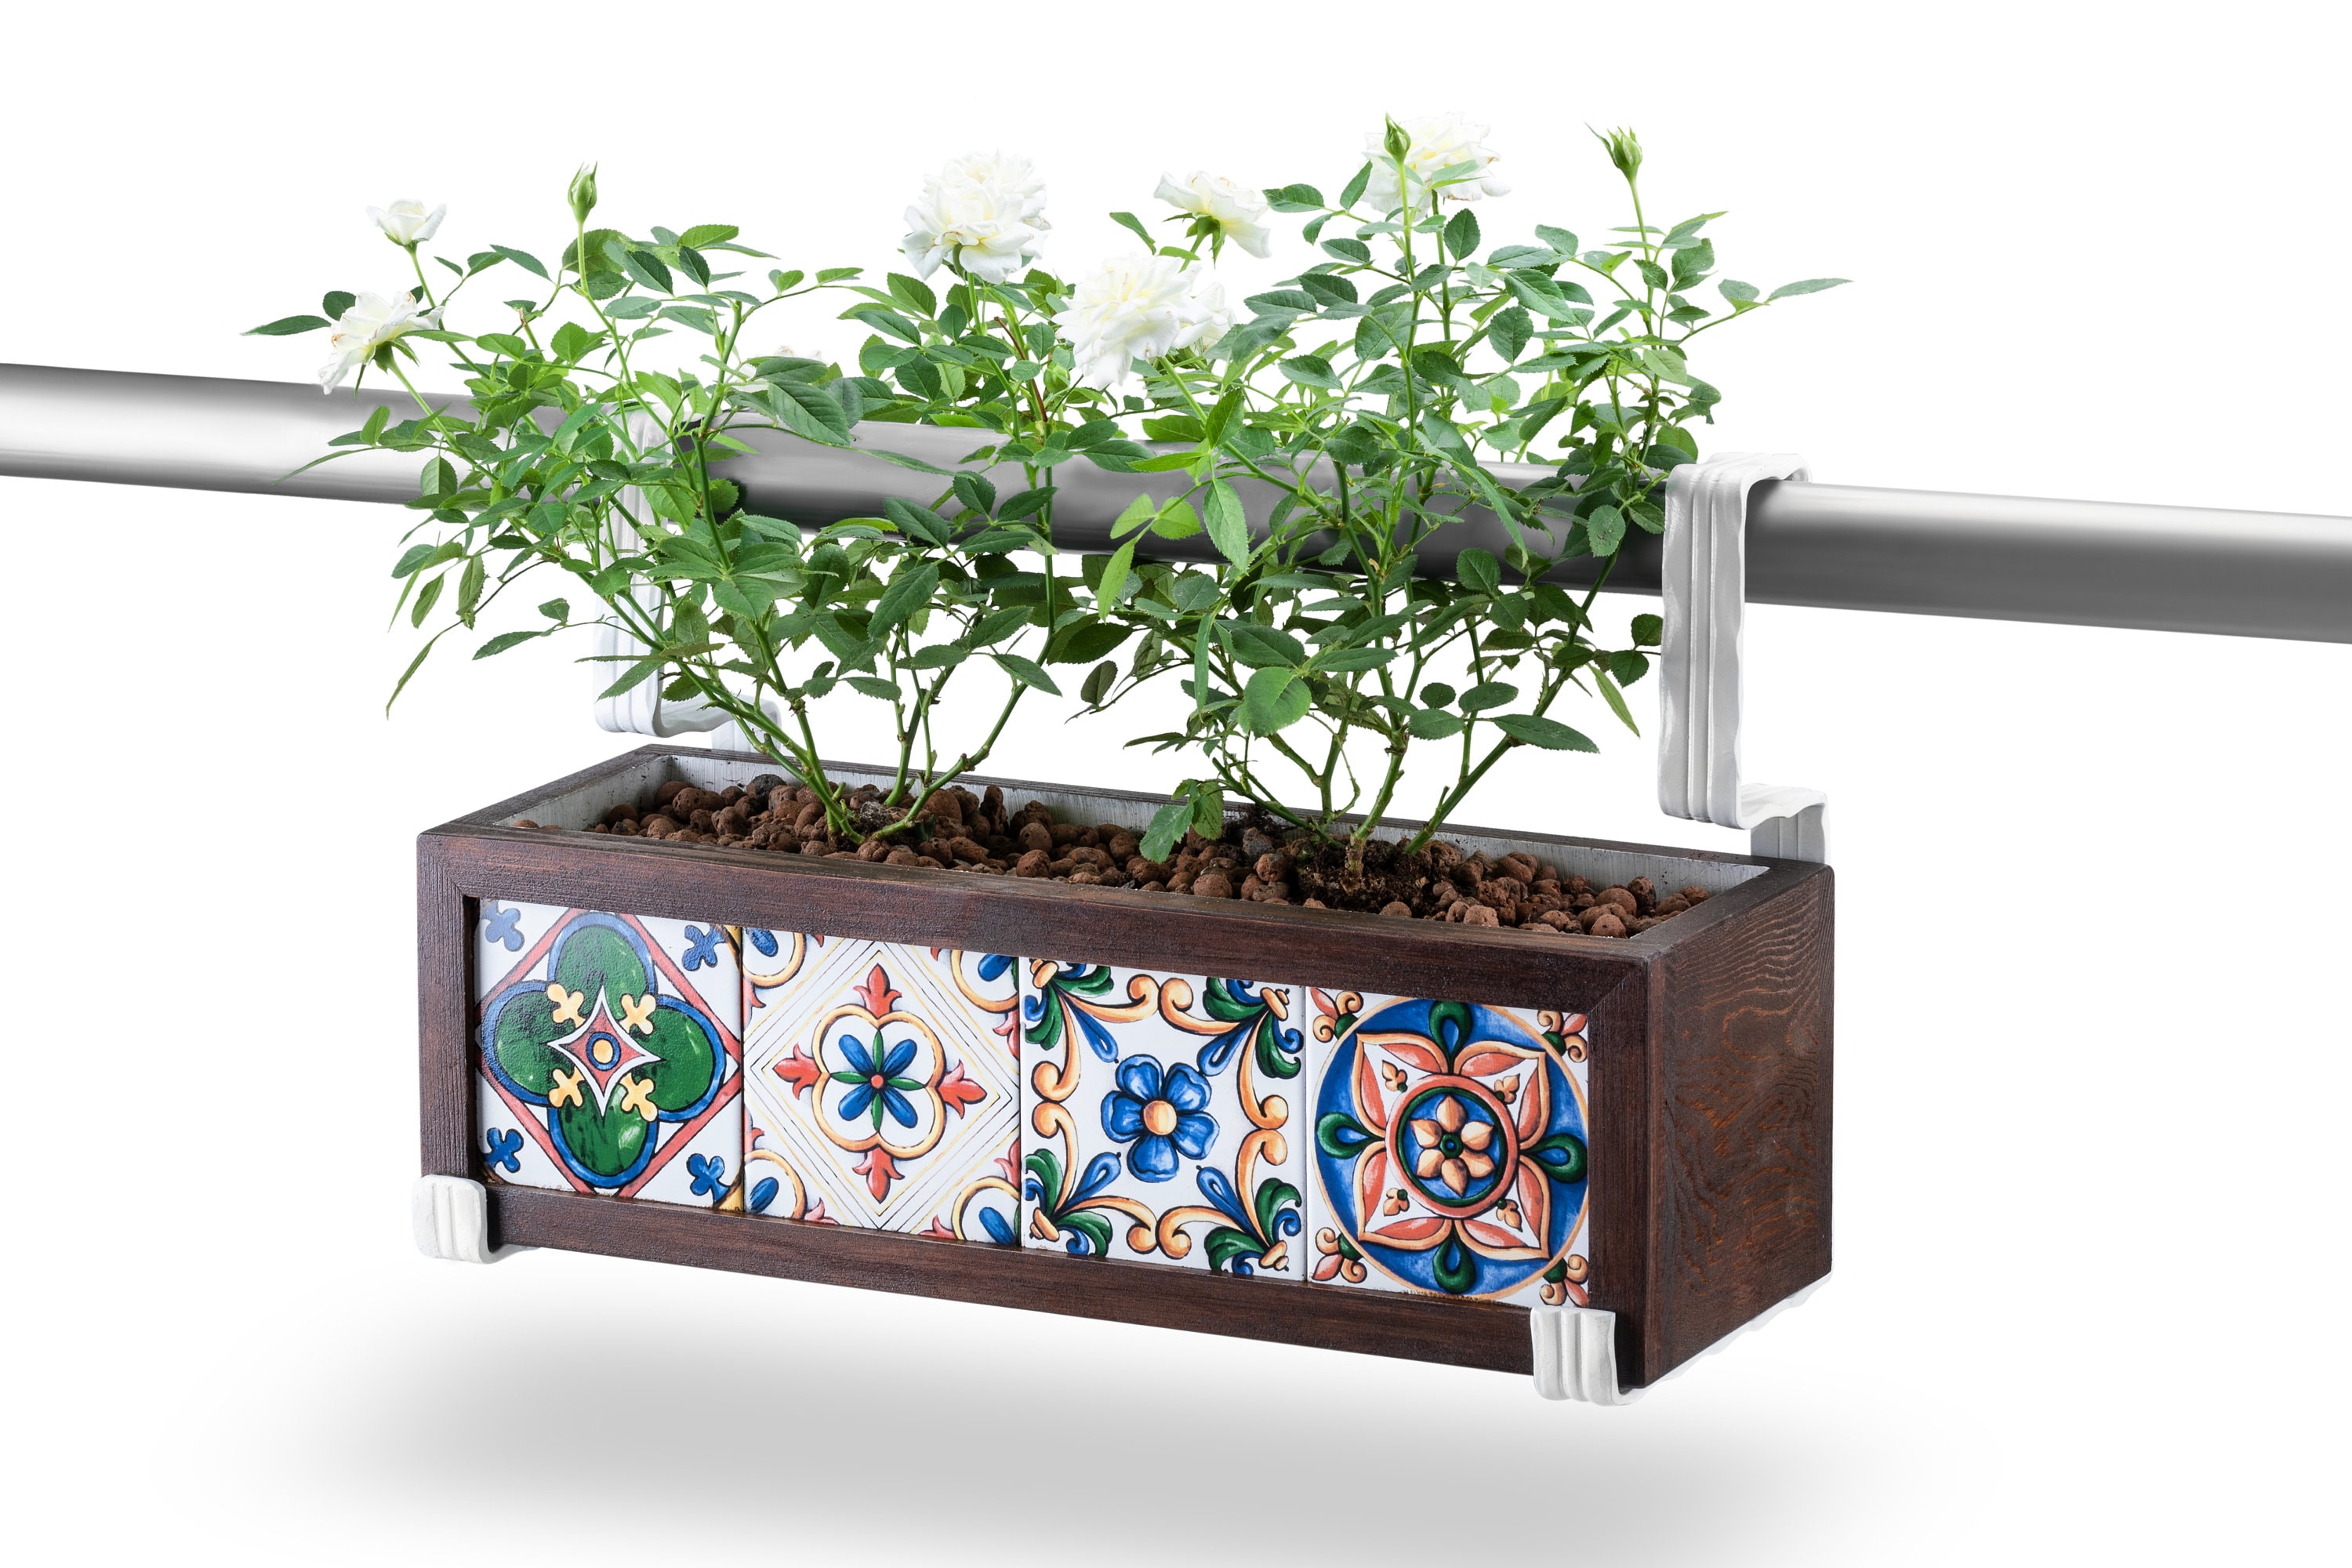 Railing Planter Box, Wooden Planter With Tiles With Custom Metal